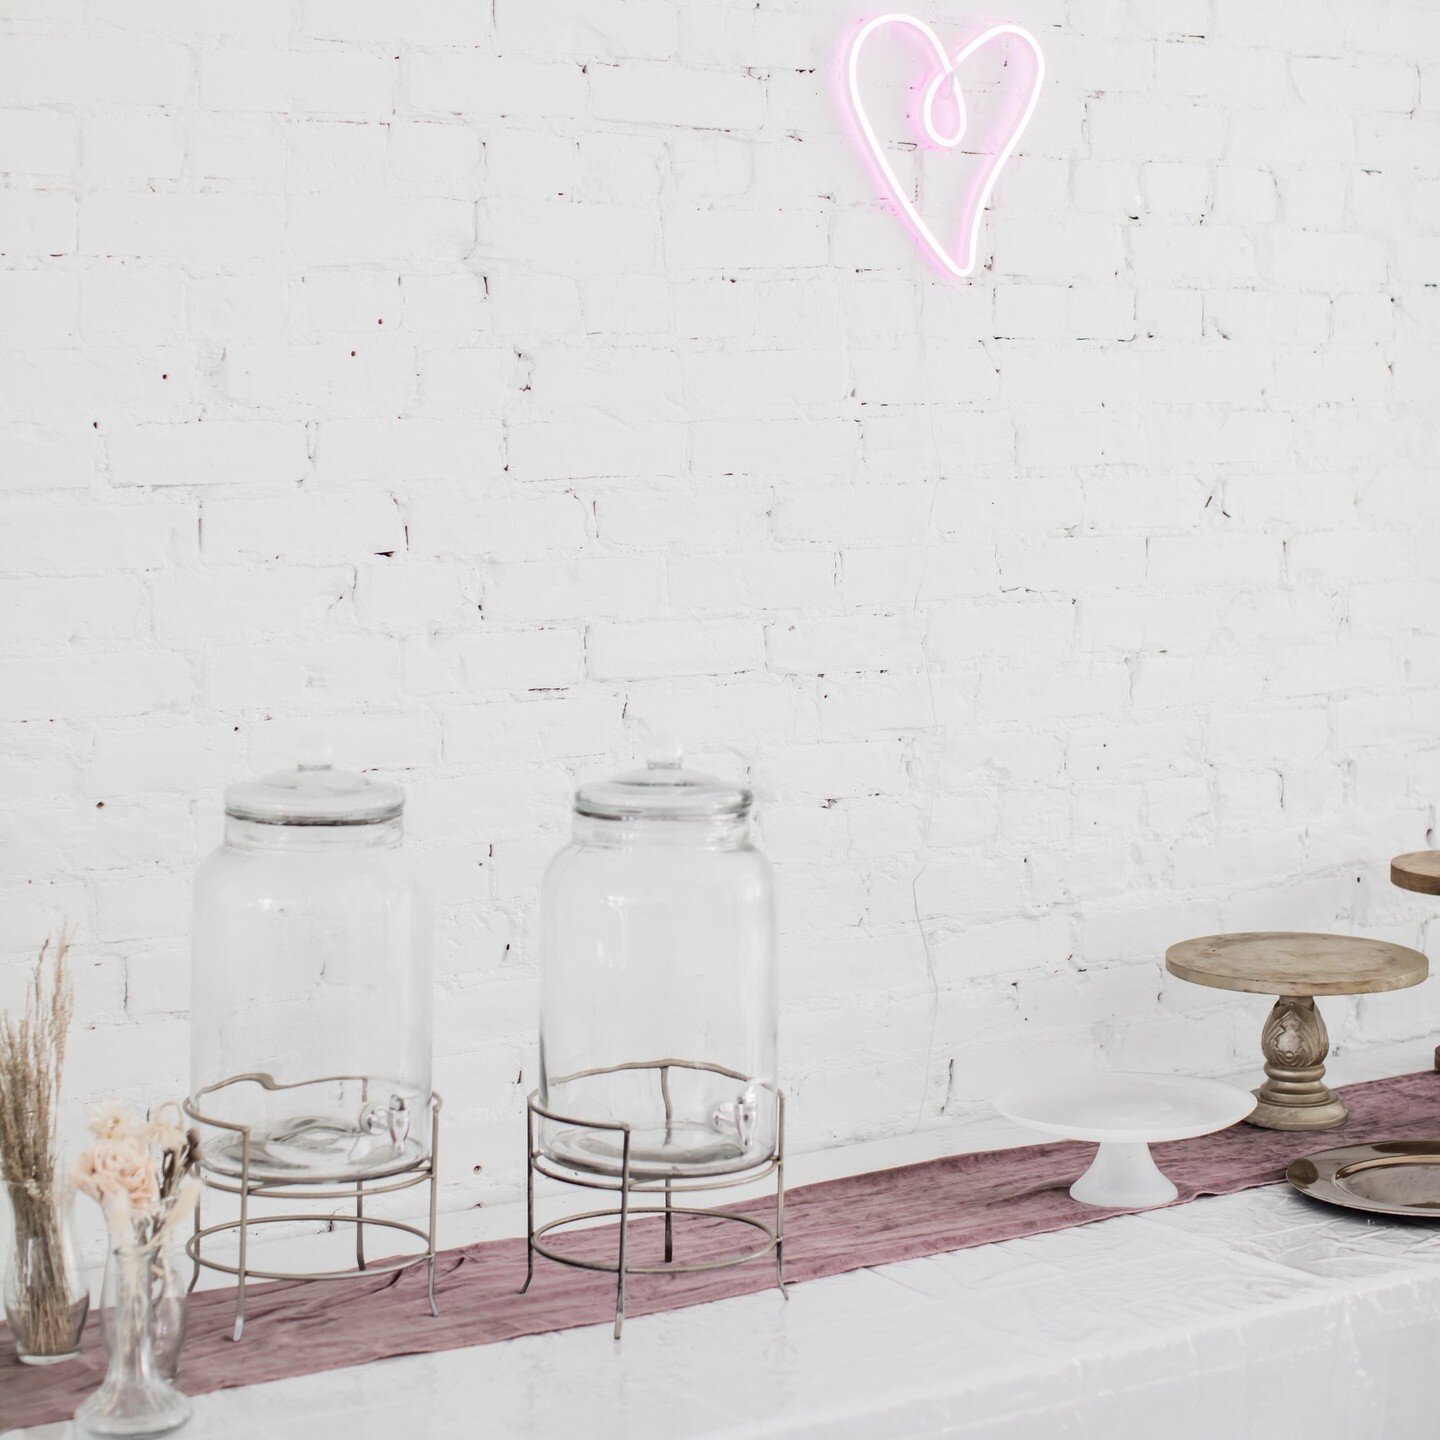 We like to make your event as easy as can be, with full set up upon arrival! We have so many options of rental add ons like these beverage dispensers and cake stands show above.
*
*
*
#ohiopartyvenue #ohioeventspace #ohioeventvenue #bridetobe #ohwedd